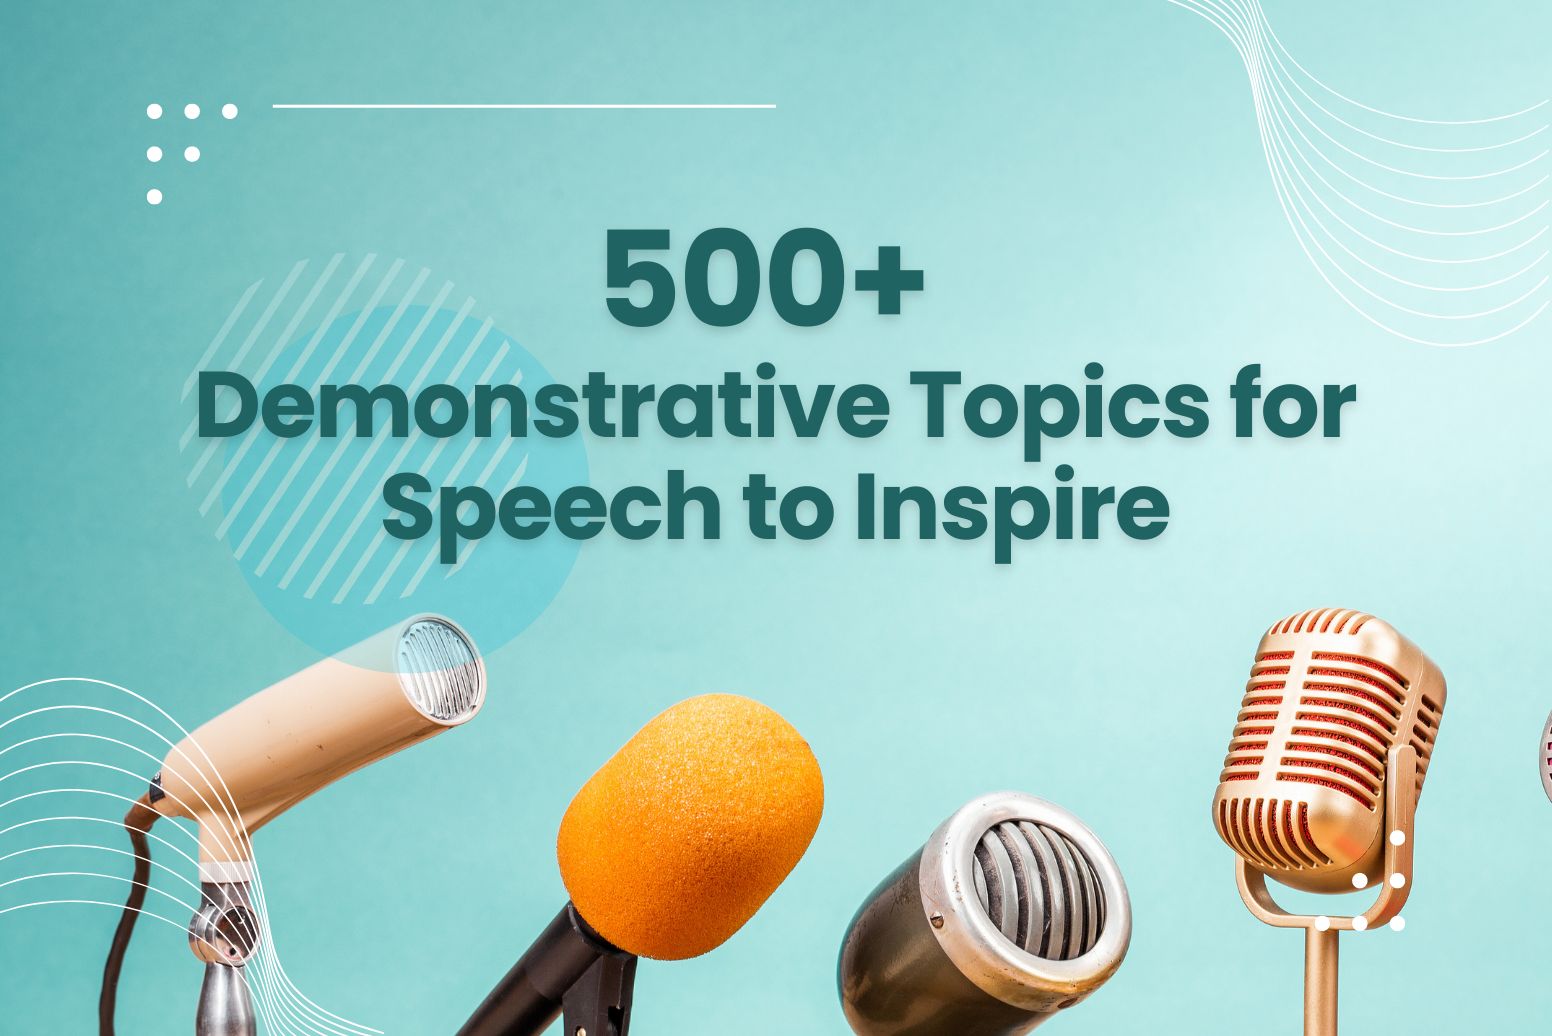 500+ Demonstrative Topics for Speech to Inspire Your Audience